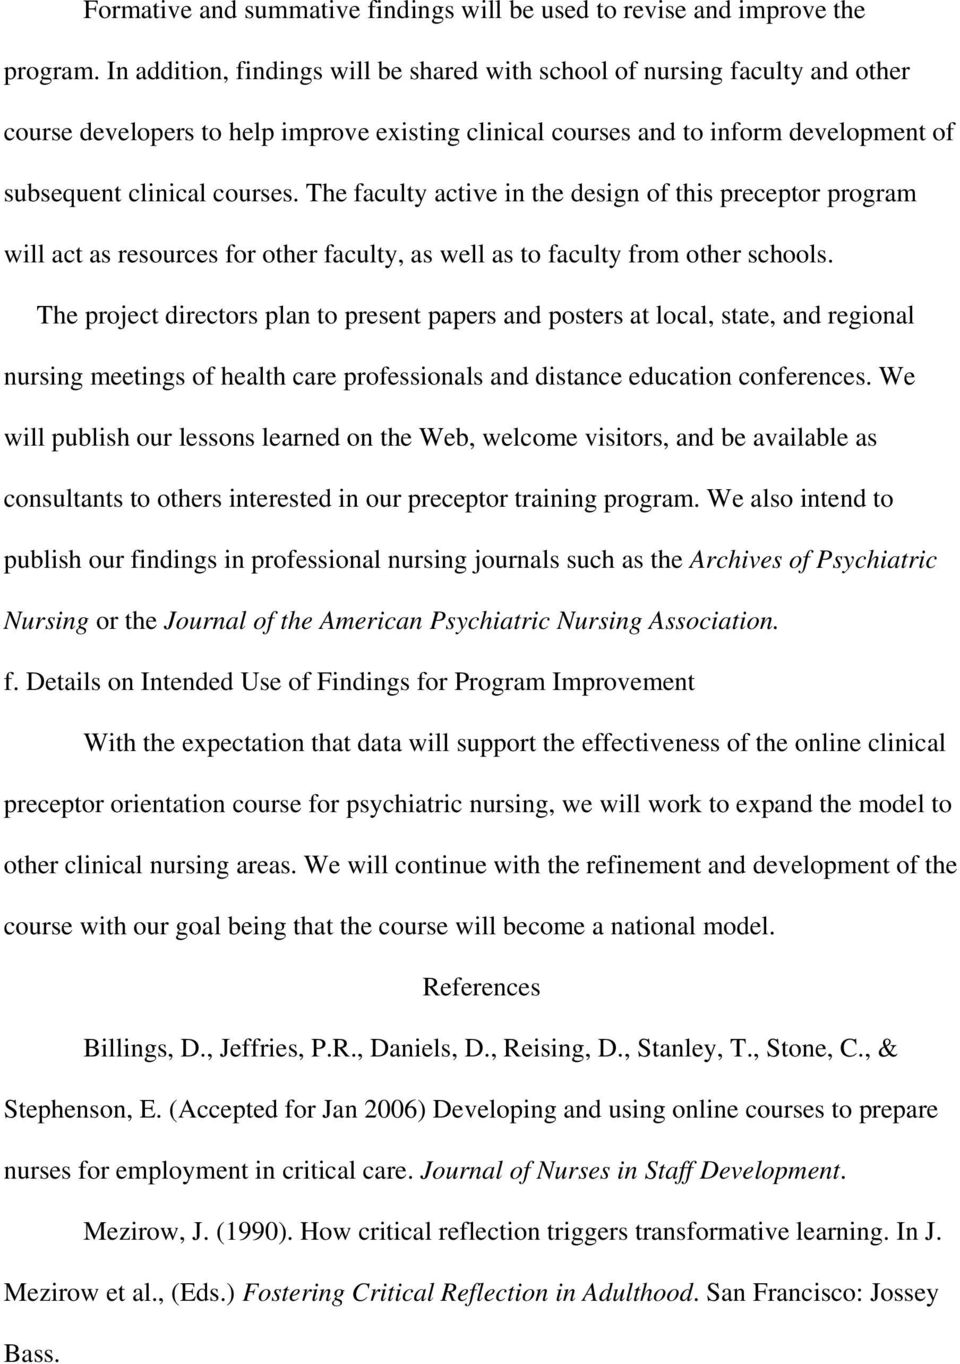 The faculty active in the design of this preceptor program will act as resources for other faculty, as well as to faculty from other schools.